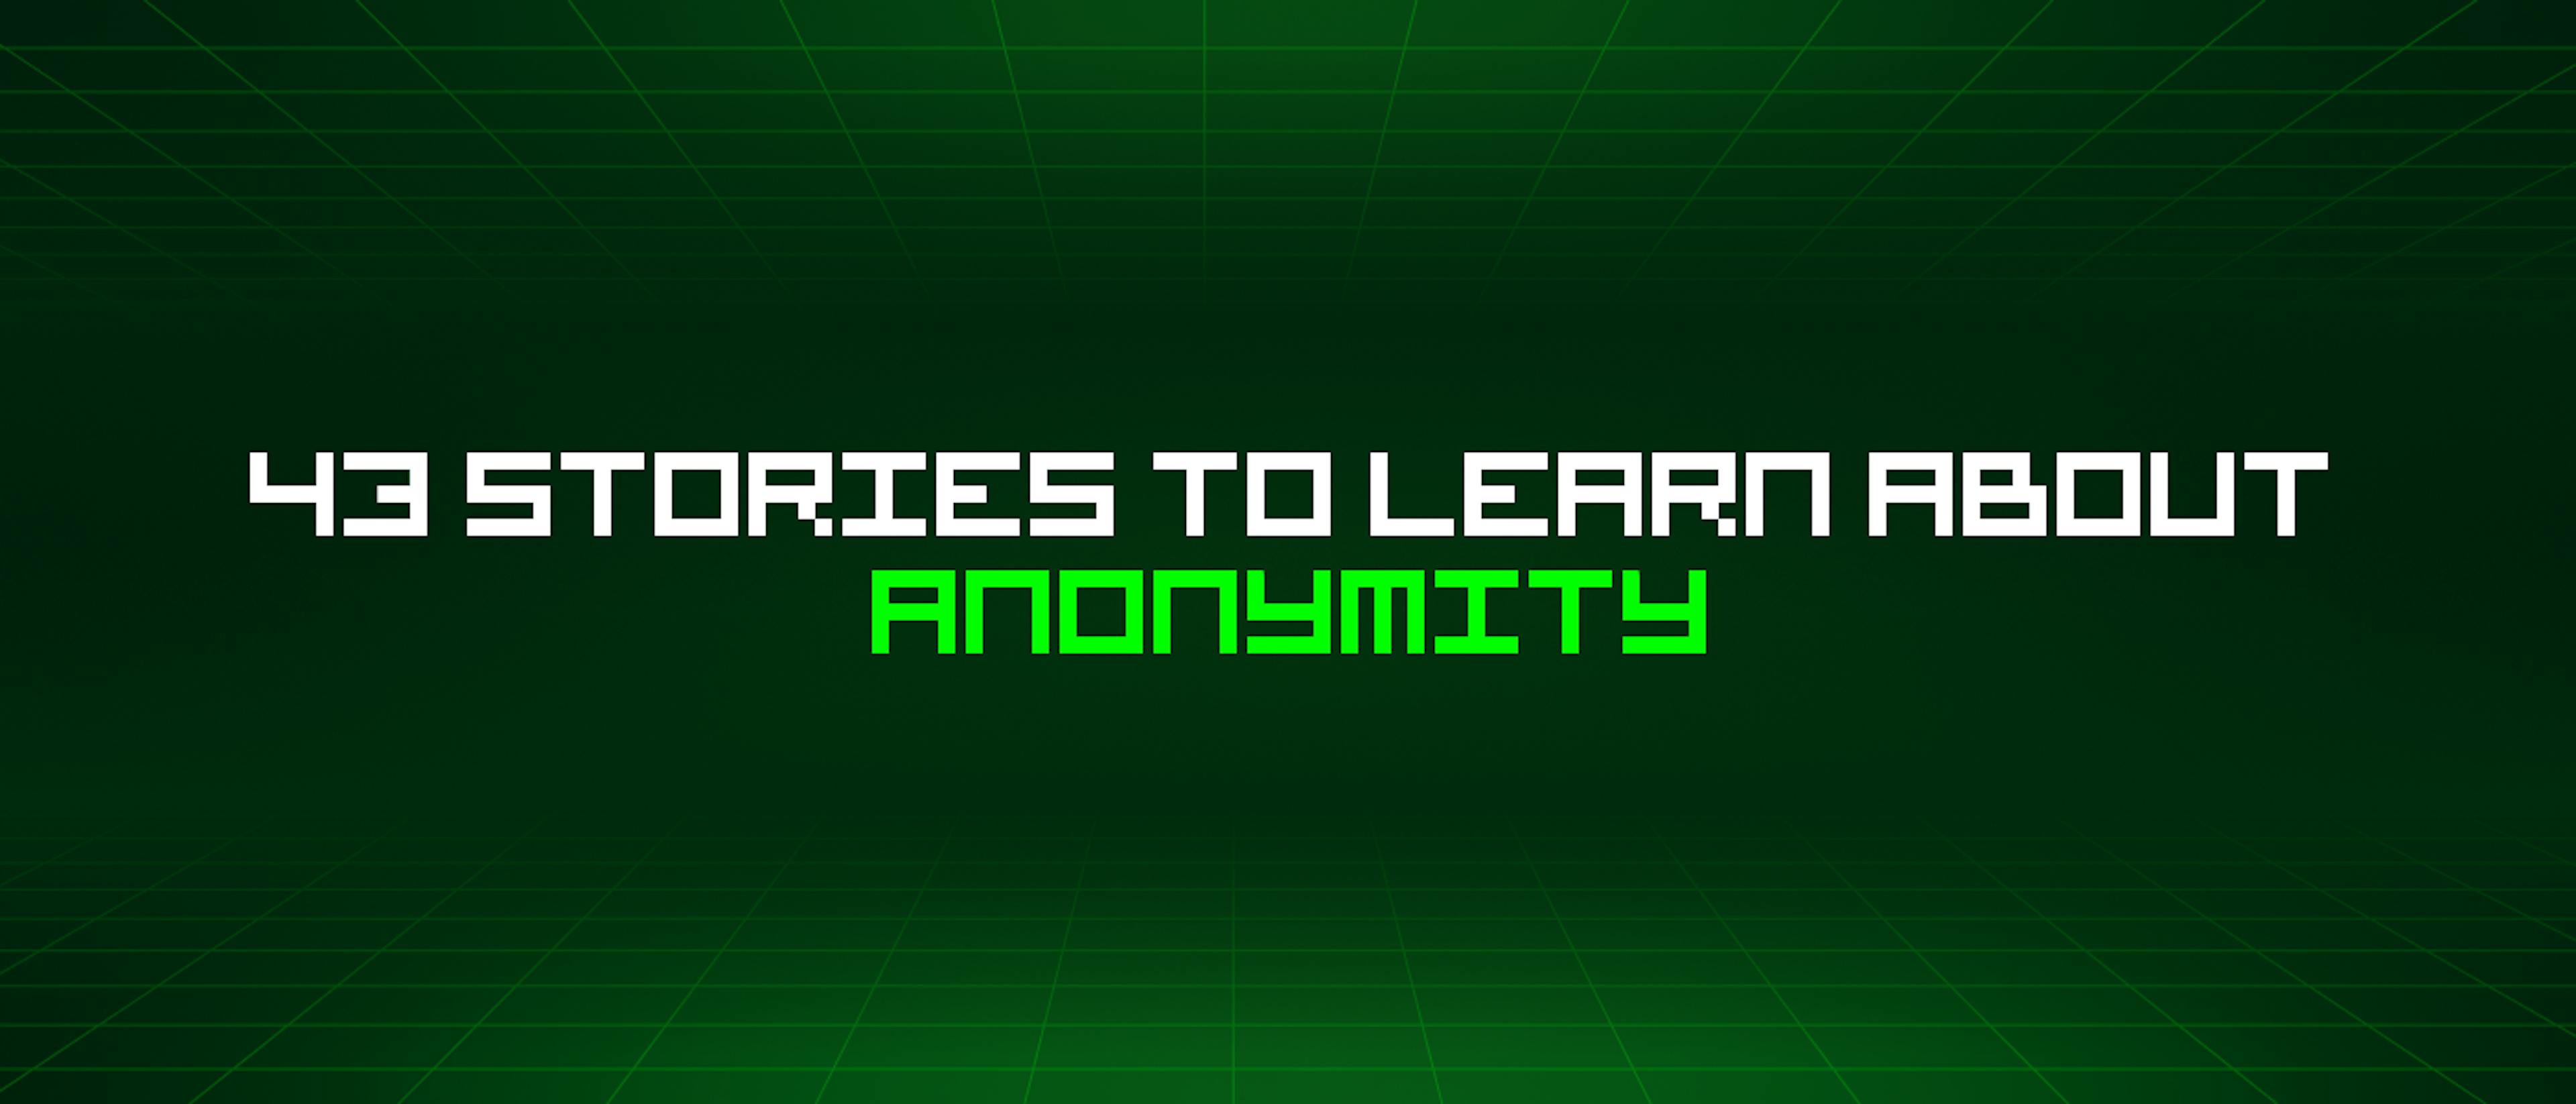 /43-stories-to-learn-about-anonymity feature image